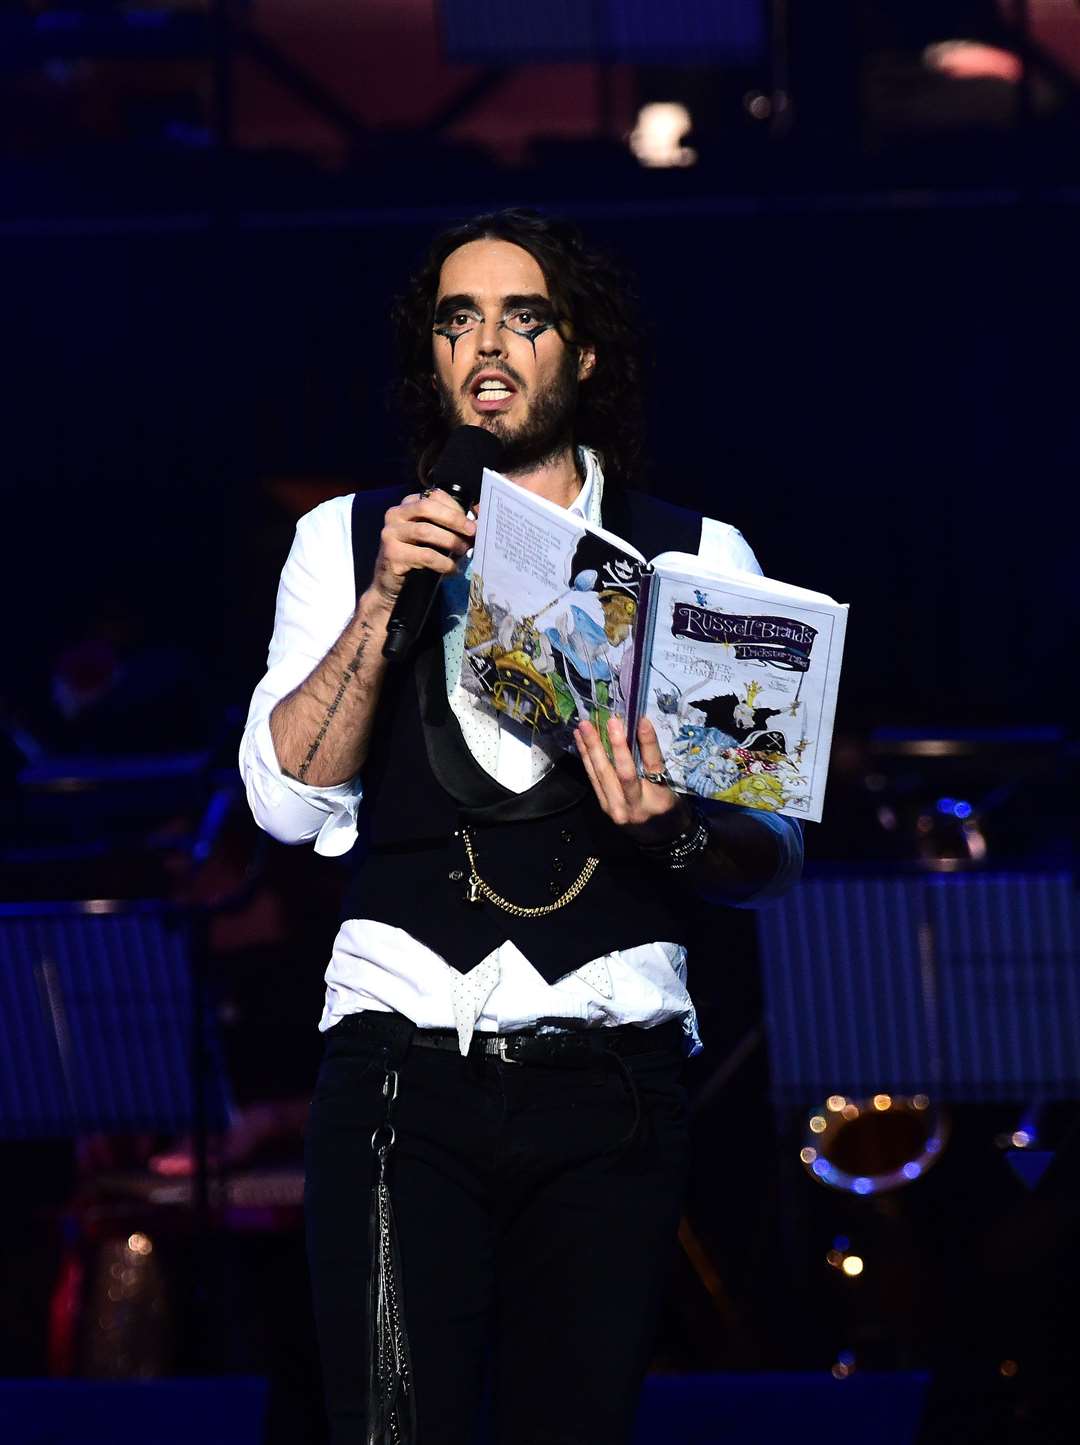 Russell Brand at the Royal Albert Hall (Ian West/PA)